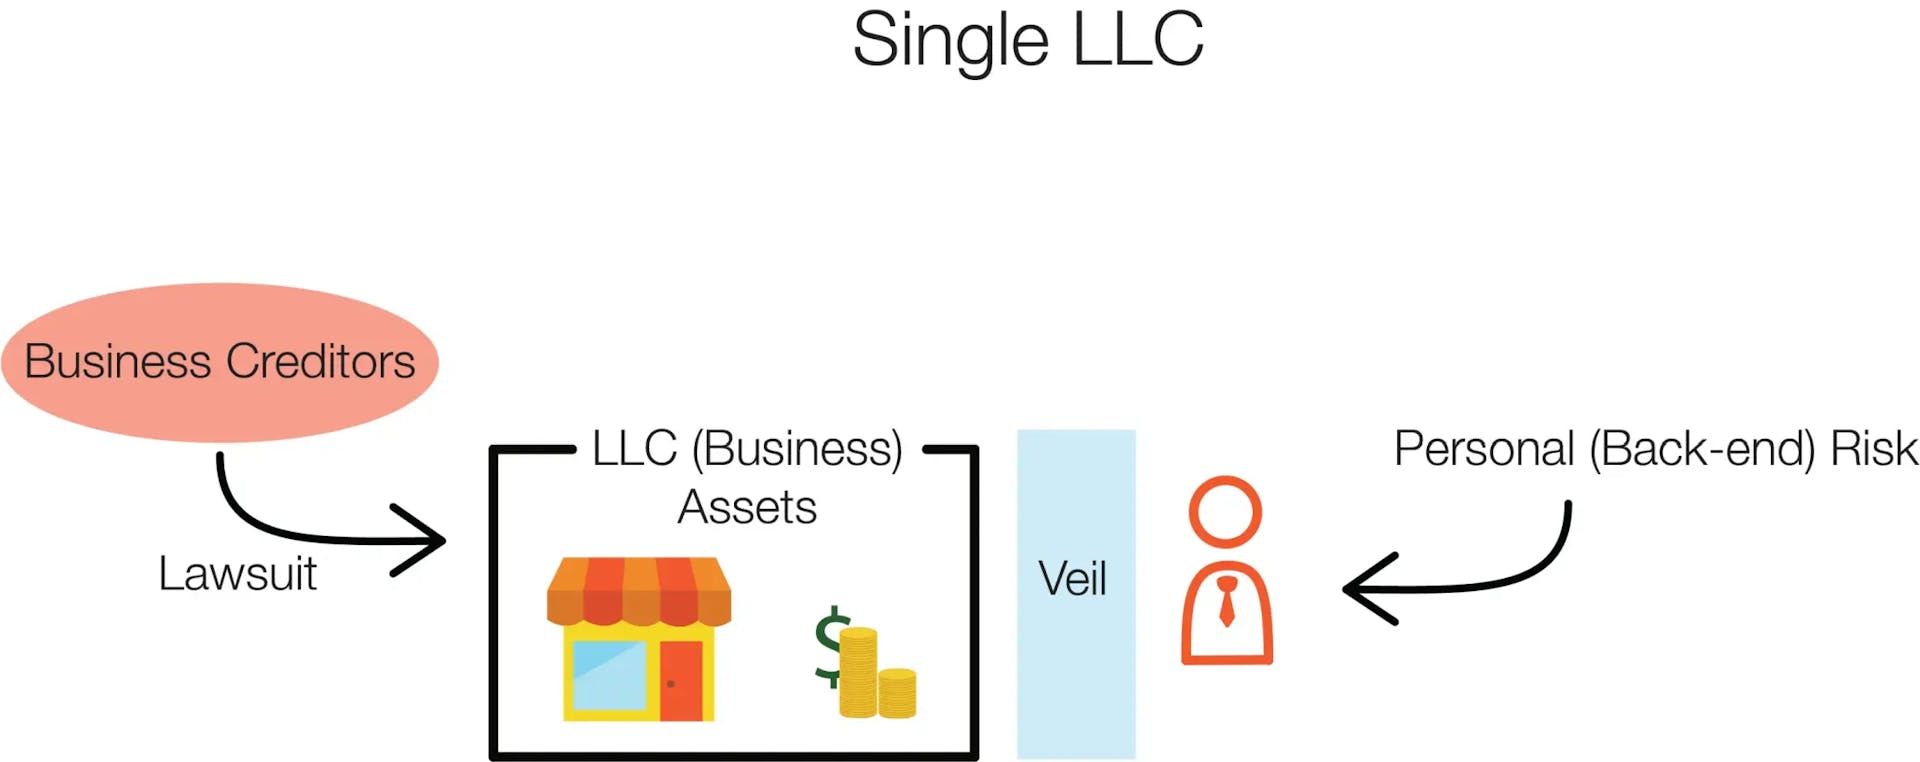 One advantages of forming an llc in New Mexico is the ability to benefit from the corporate veil that protects personal assets from business creditors.